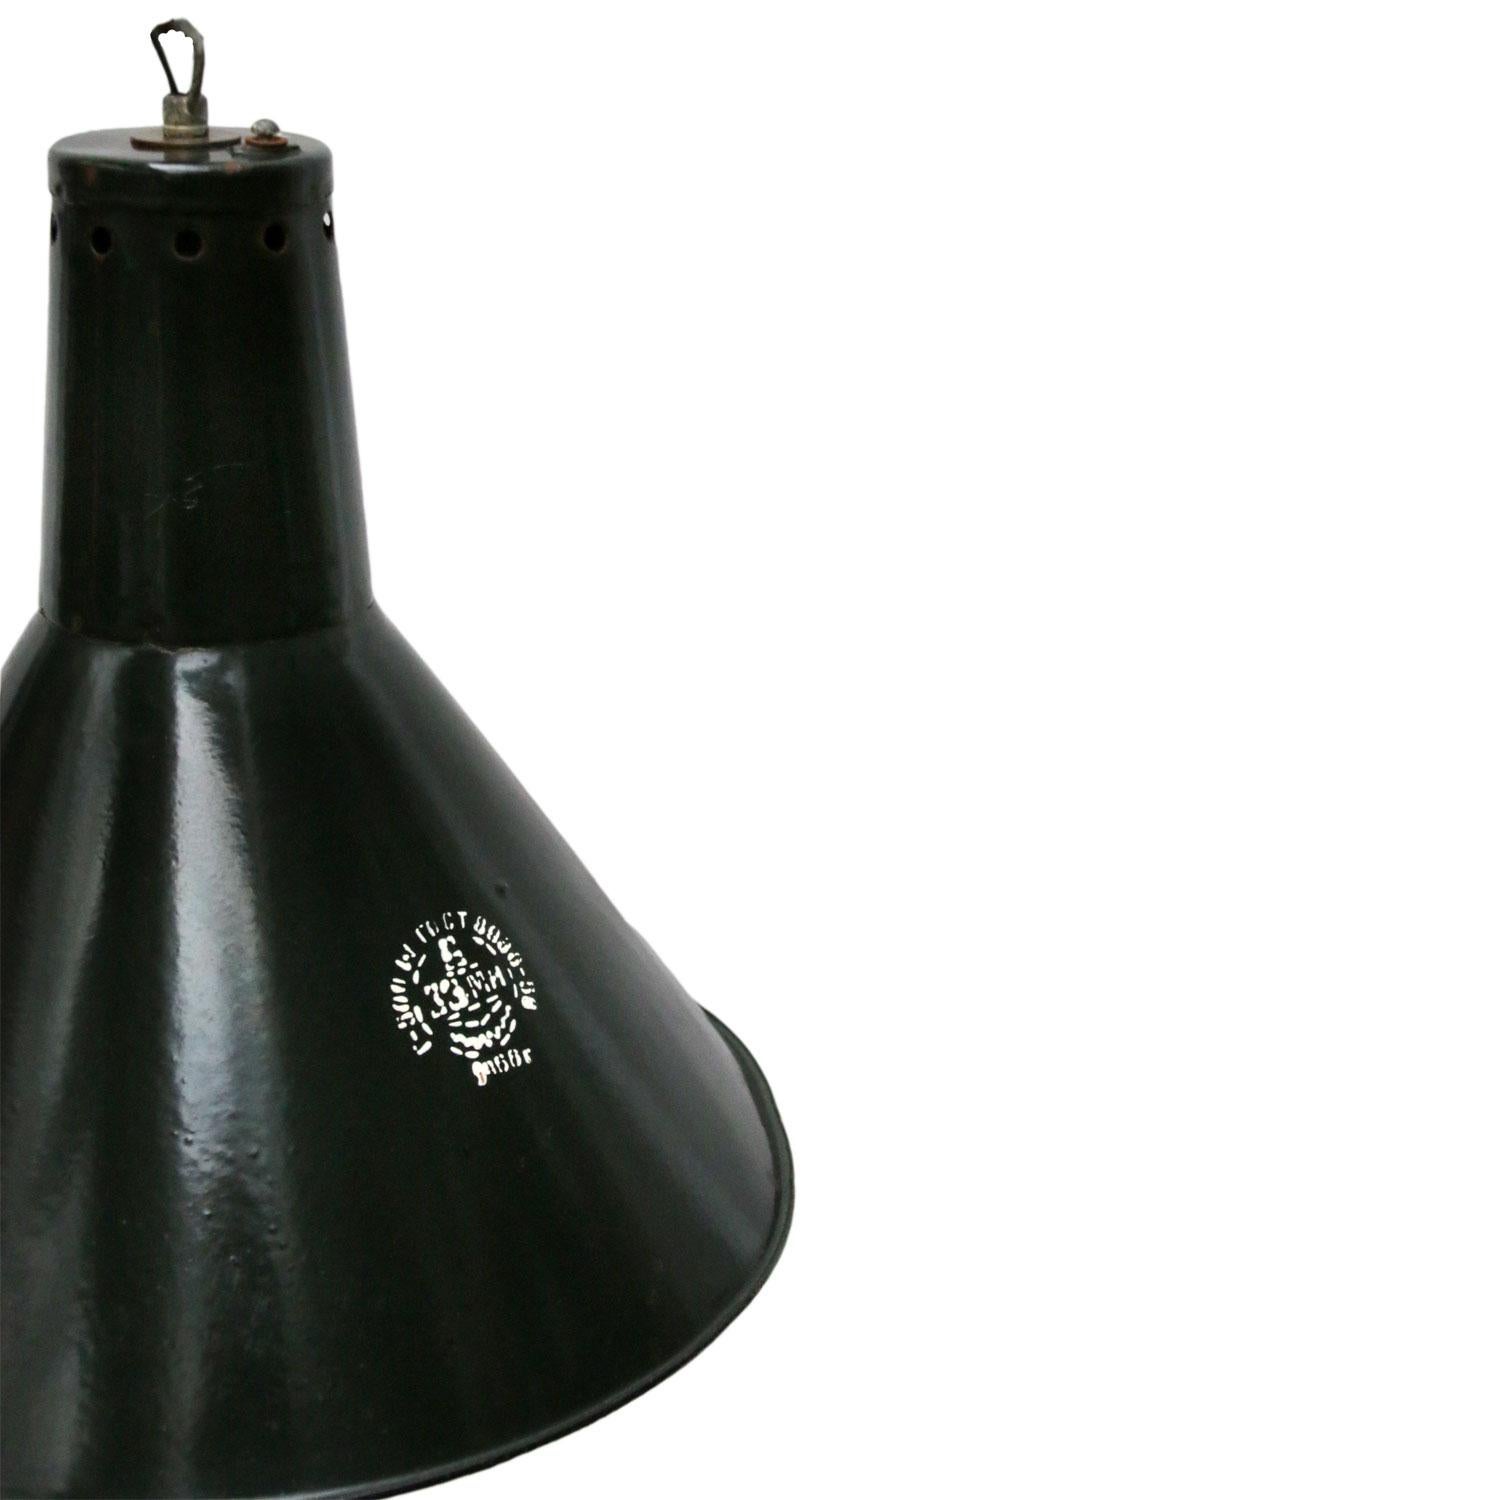 Dark green enamel factory pendant from the Ukraine.
White interior.

Weight: 2.0 kg / 4.4 lb.

All lamps have been made suitable by international standards for incandescent light bulbs, energy-efficient and LED bulbs. E26/E27 bulb holders and